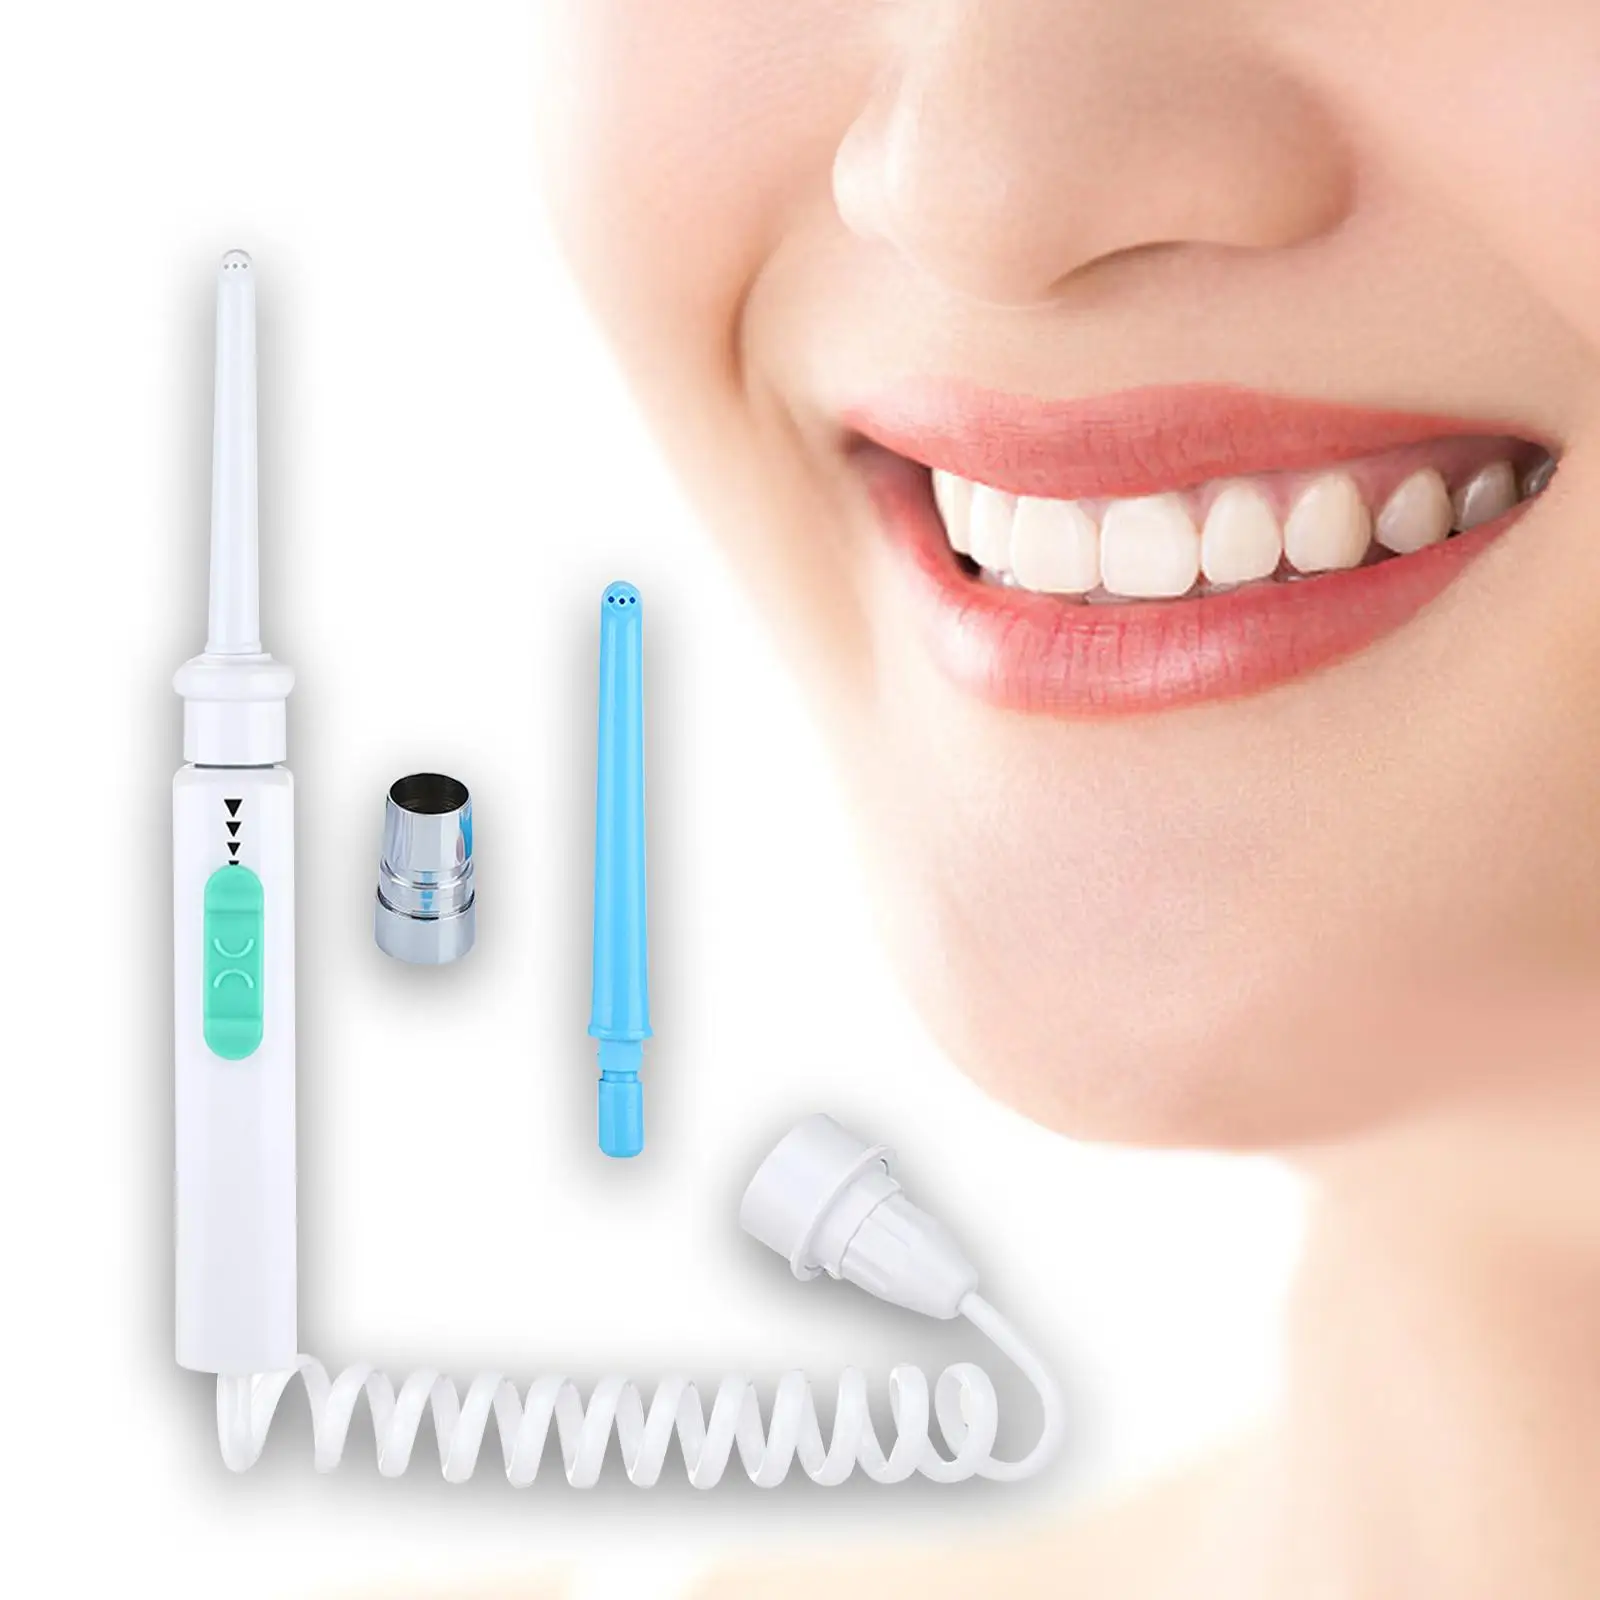 Teeth Cleaner Waterproof Portable Stain Calculus Removal Dentures Professional Tooth Cleaning Travel Scaler Water Flosser